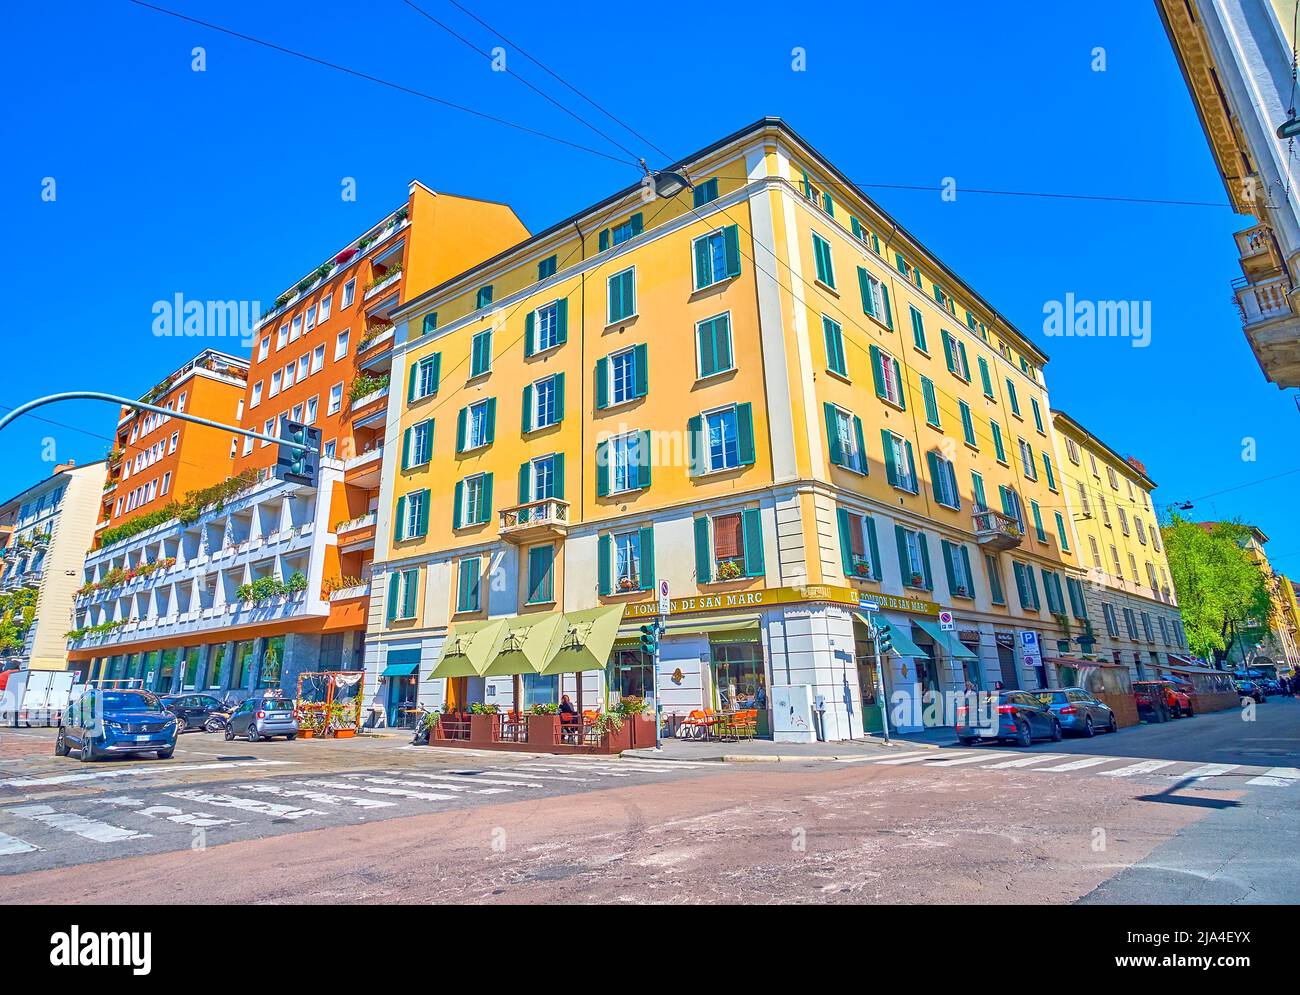 MILAN, ITALY - APRIL 5, 2022: The crossroad in Brera, the historical neighborhood of Milan with nice buildigns and numerous outdoor restaurants, on Ap Stock Photo